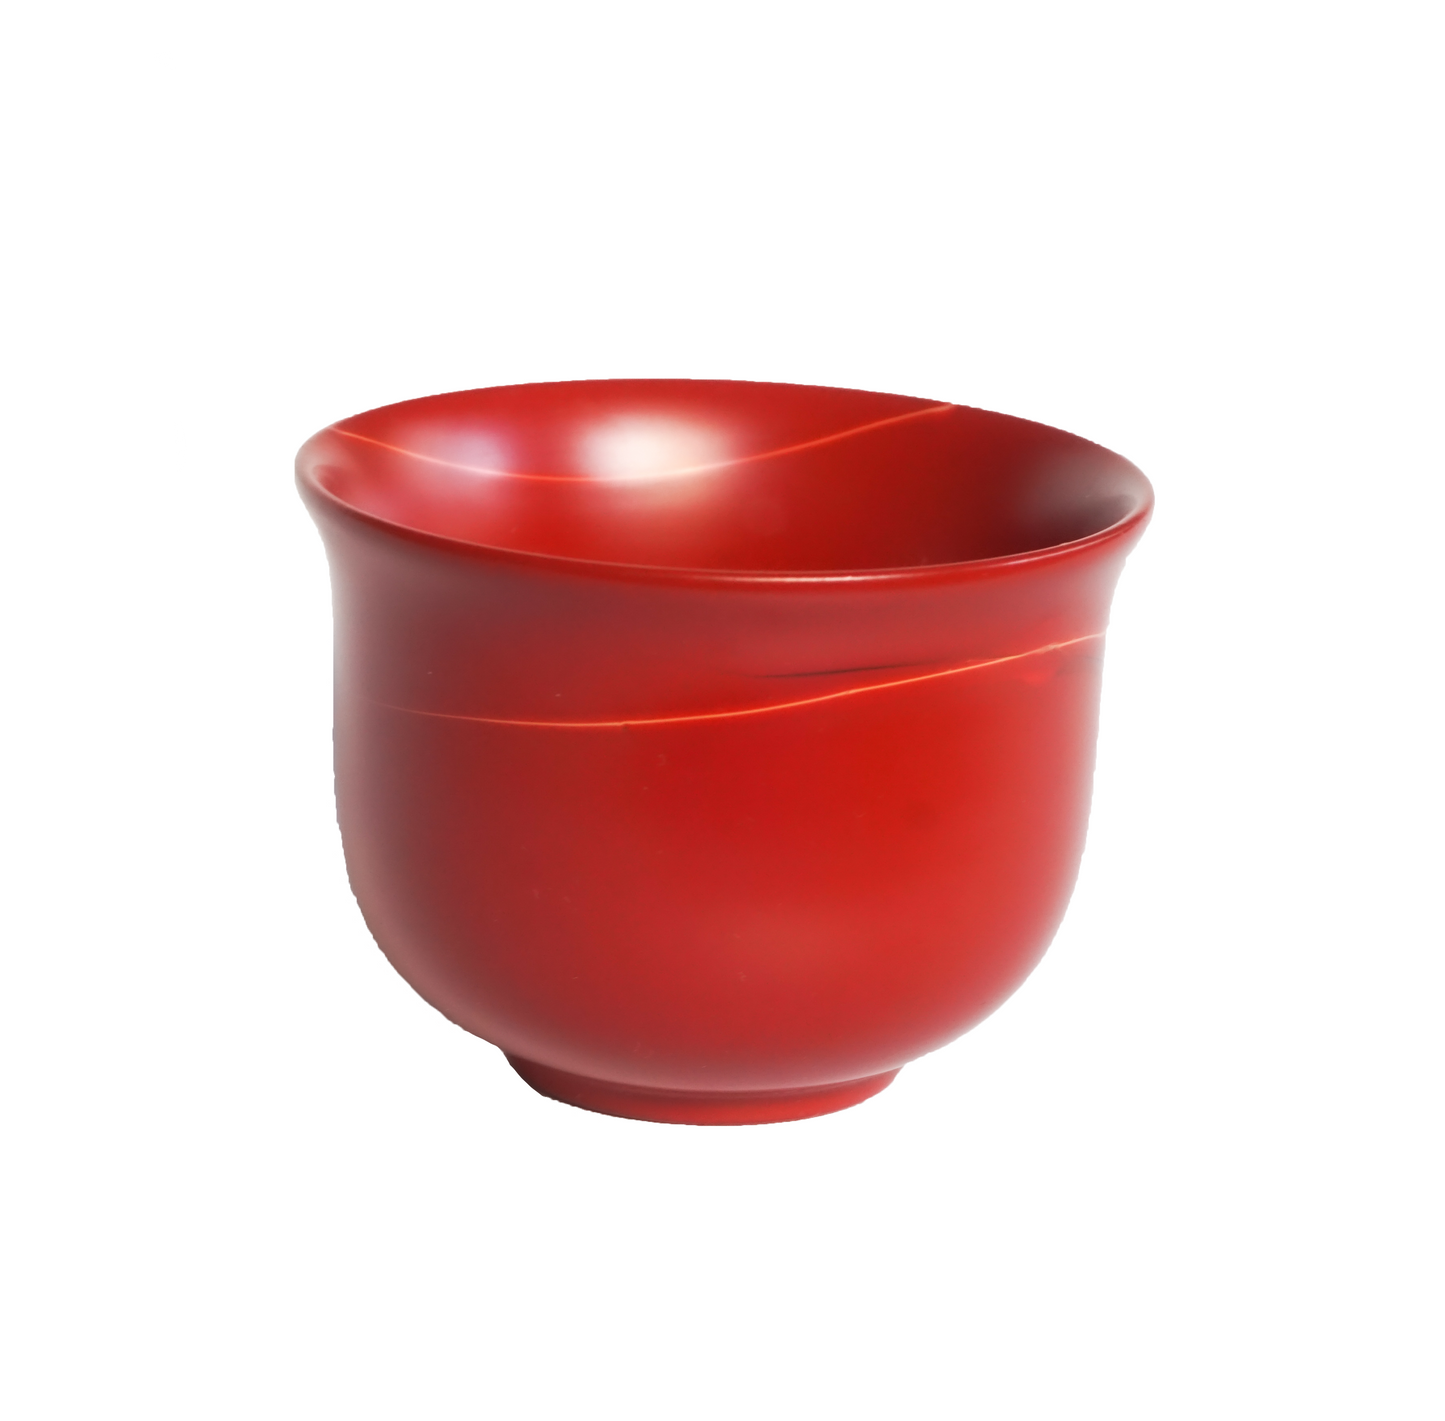 Japanese Red Lacquered Cup - Handcrafted by Lacquer Master Yagi